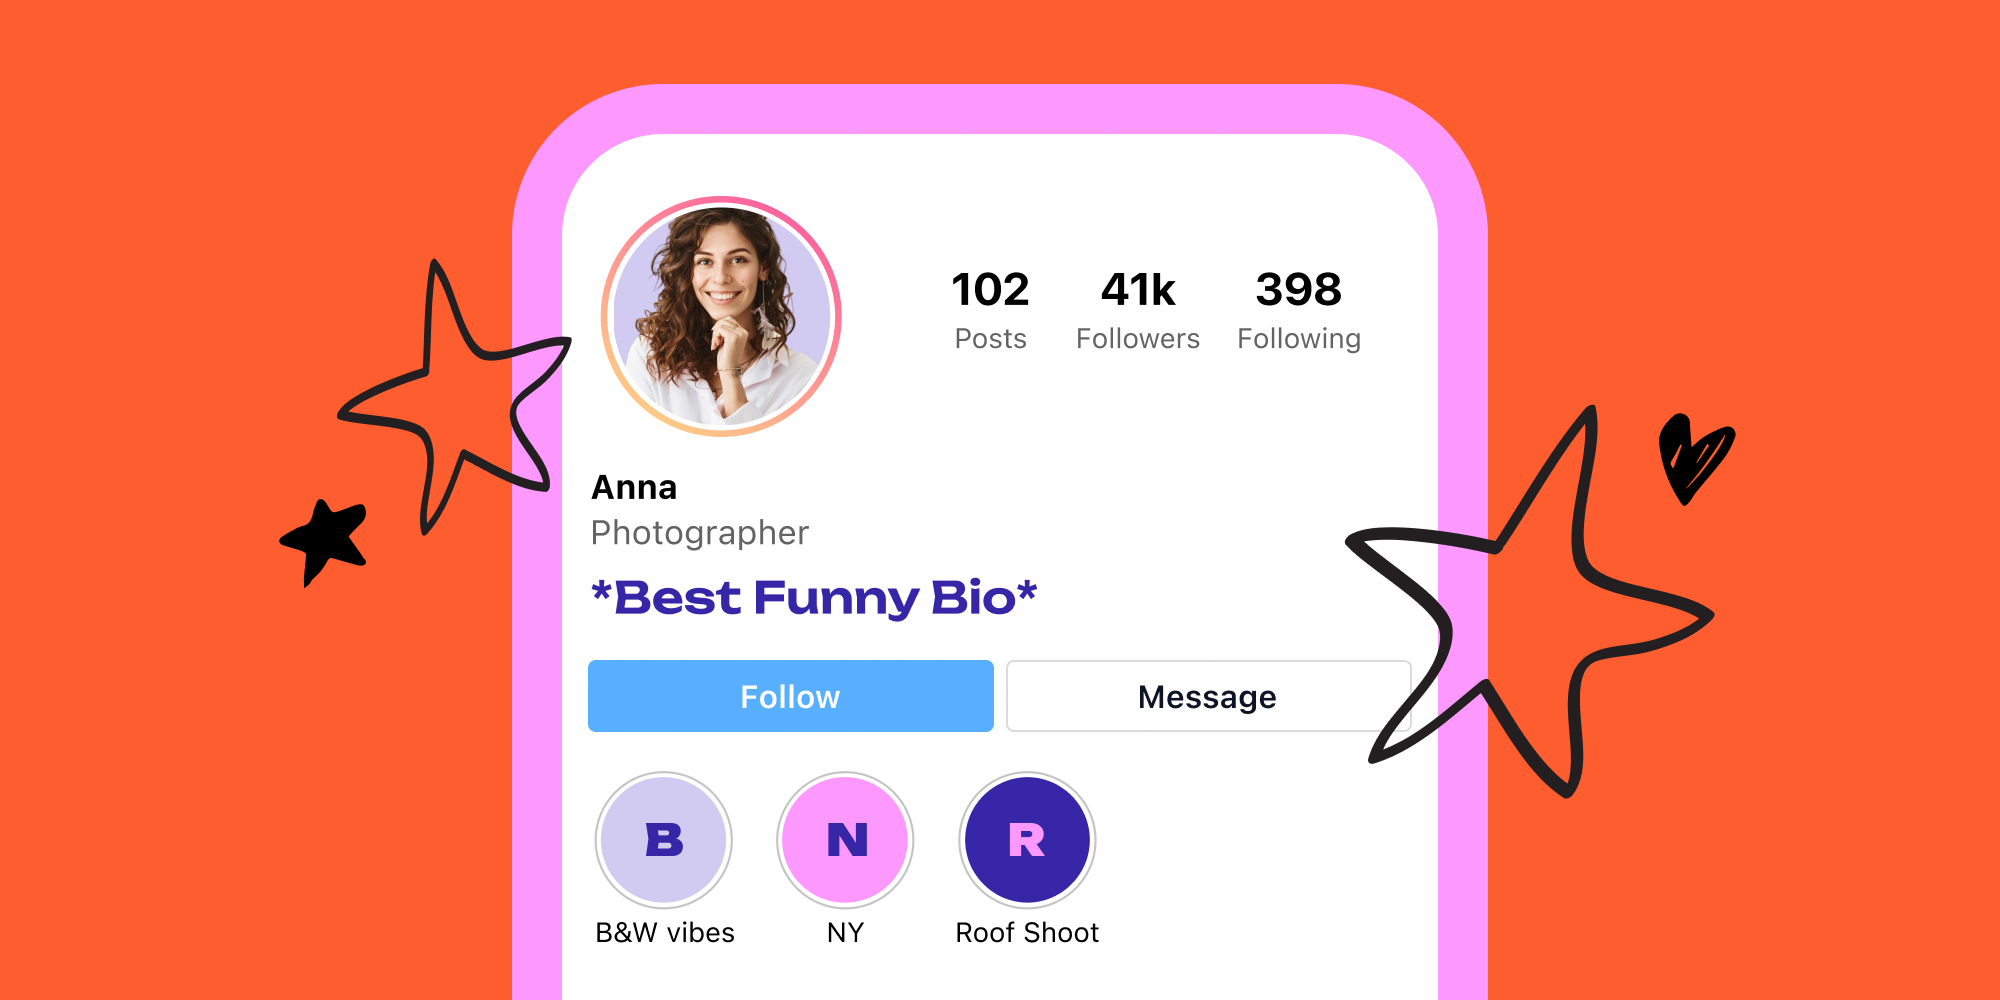 30+ Funny Instagram and TikTok Bios to Make Your Profile Stand Out